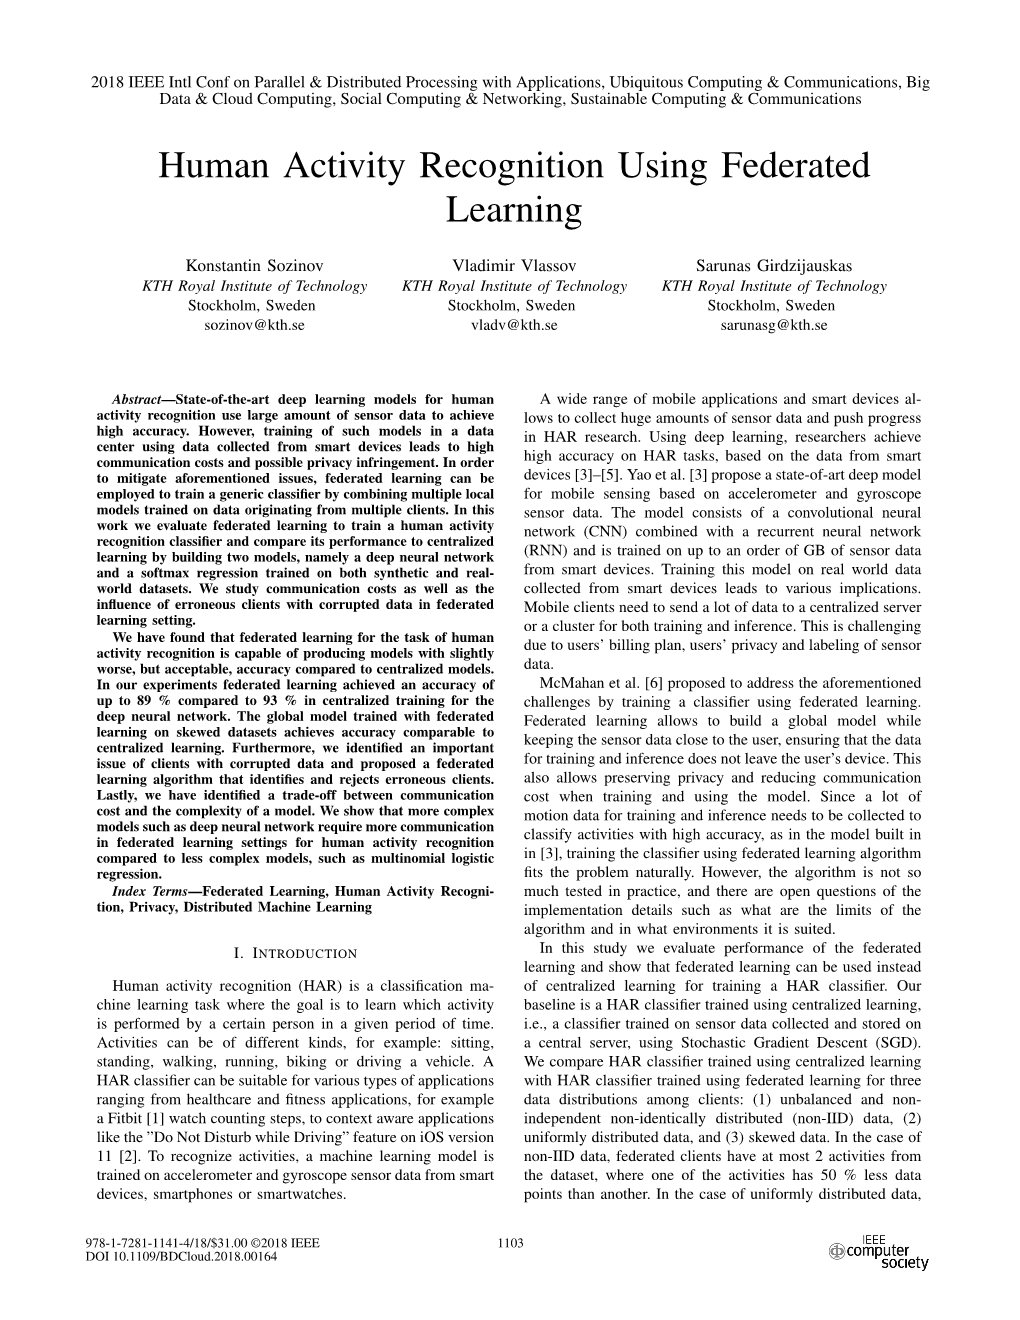 Human Activity Recognition Using Federated Learning